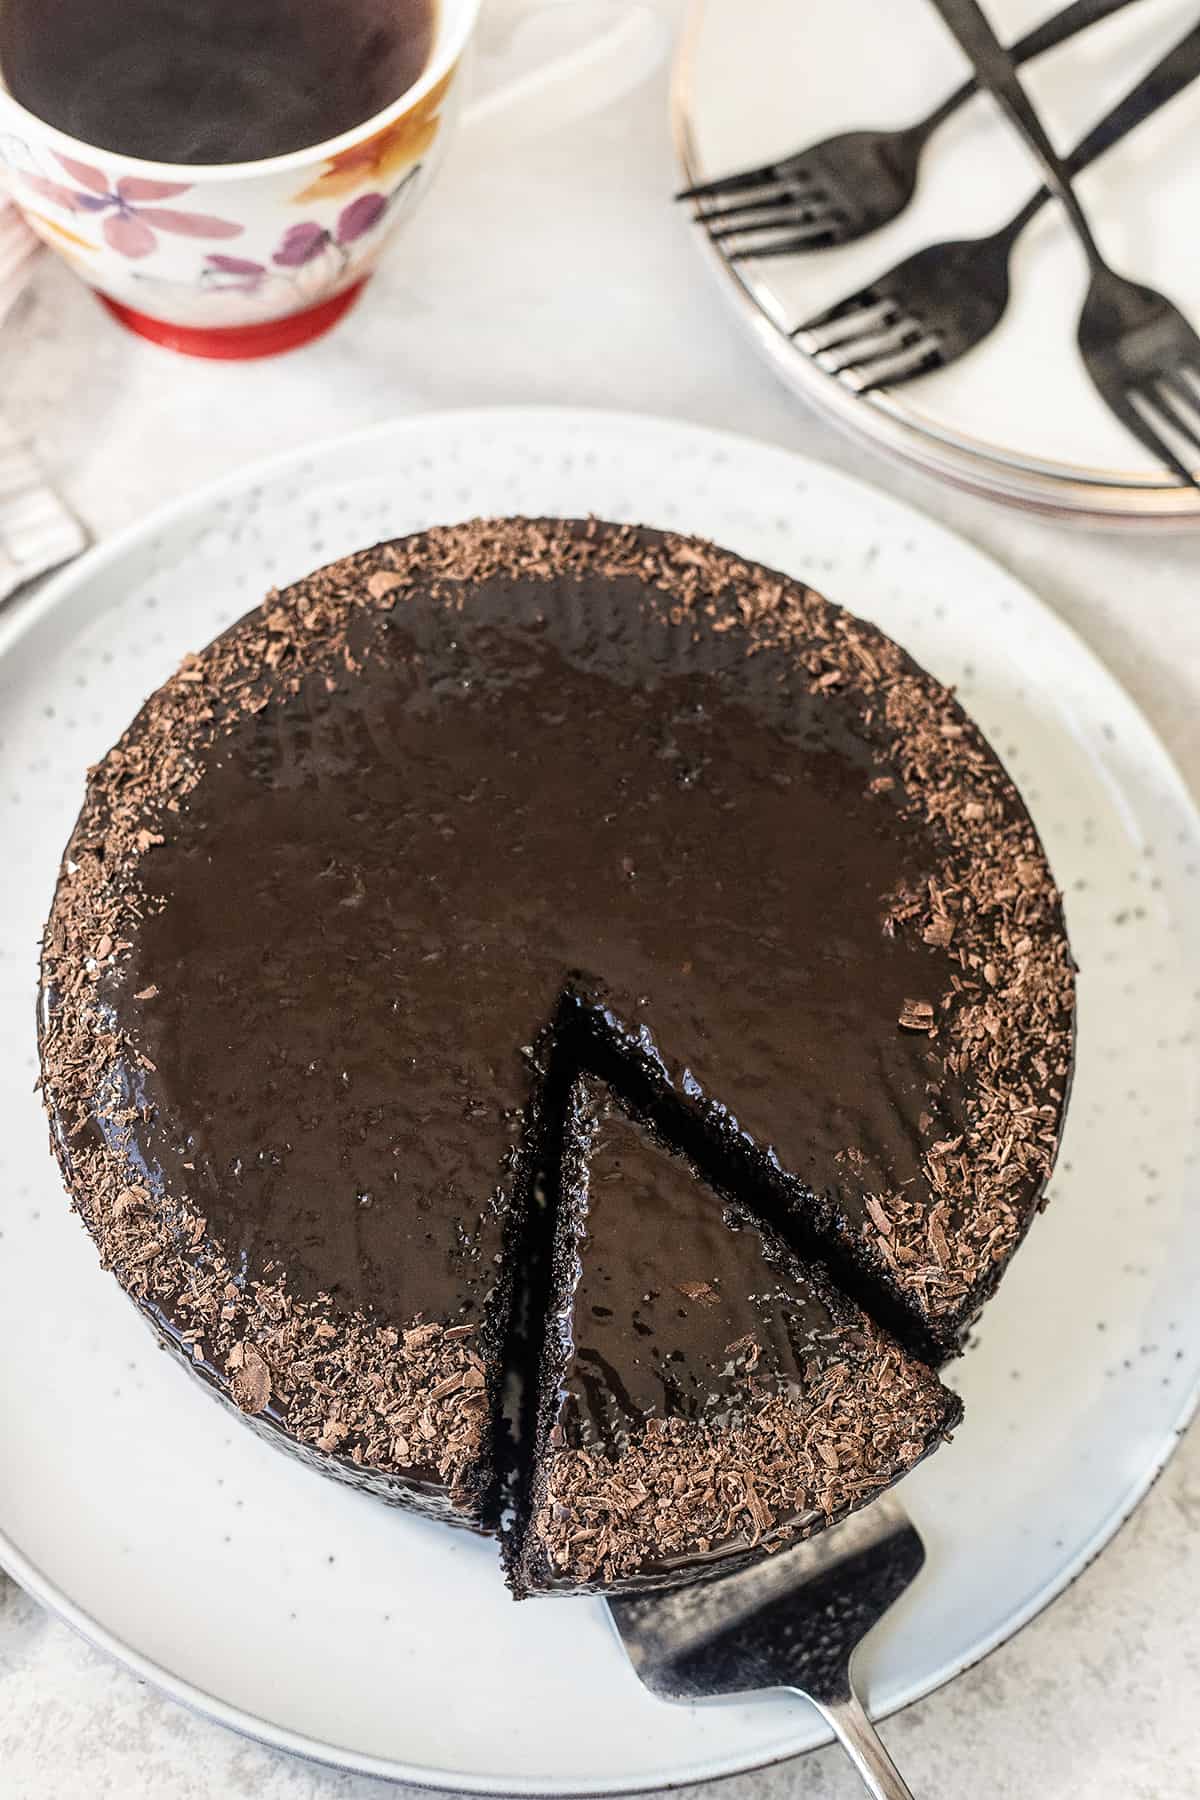 A whole chocolate cake with a slice that is about to be served next to plates with fork and a cup of coffee.